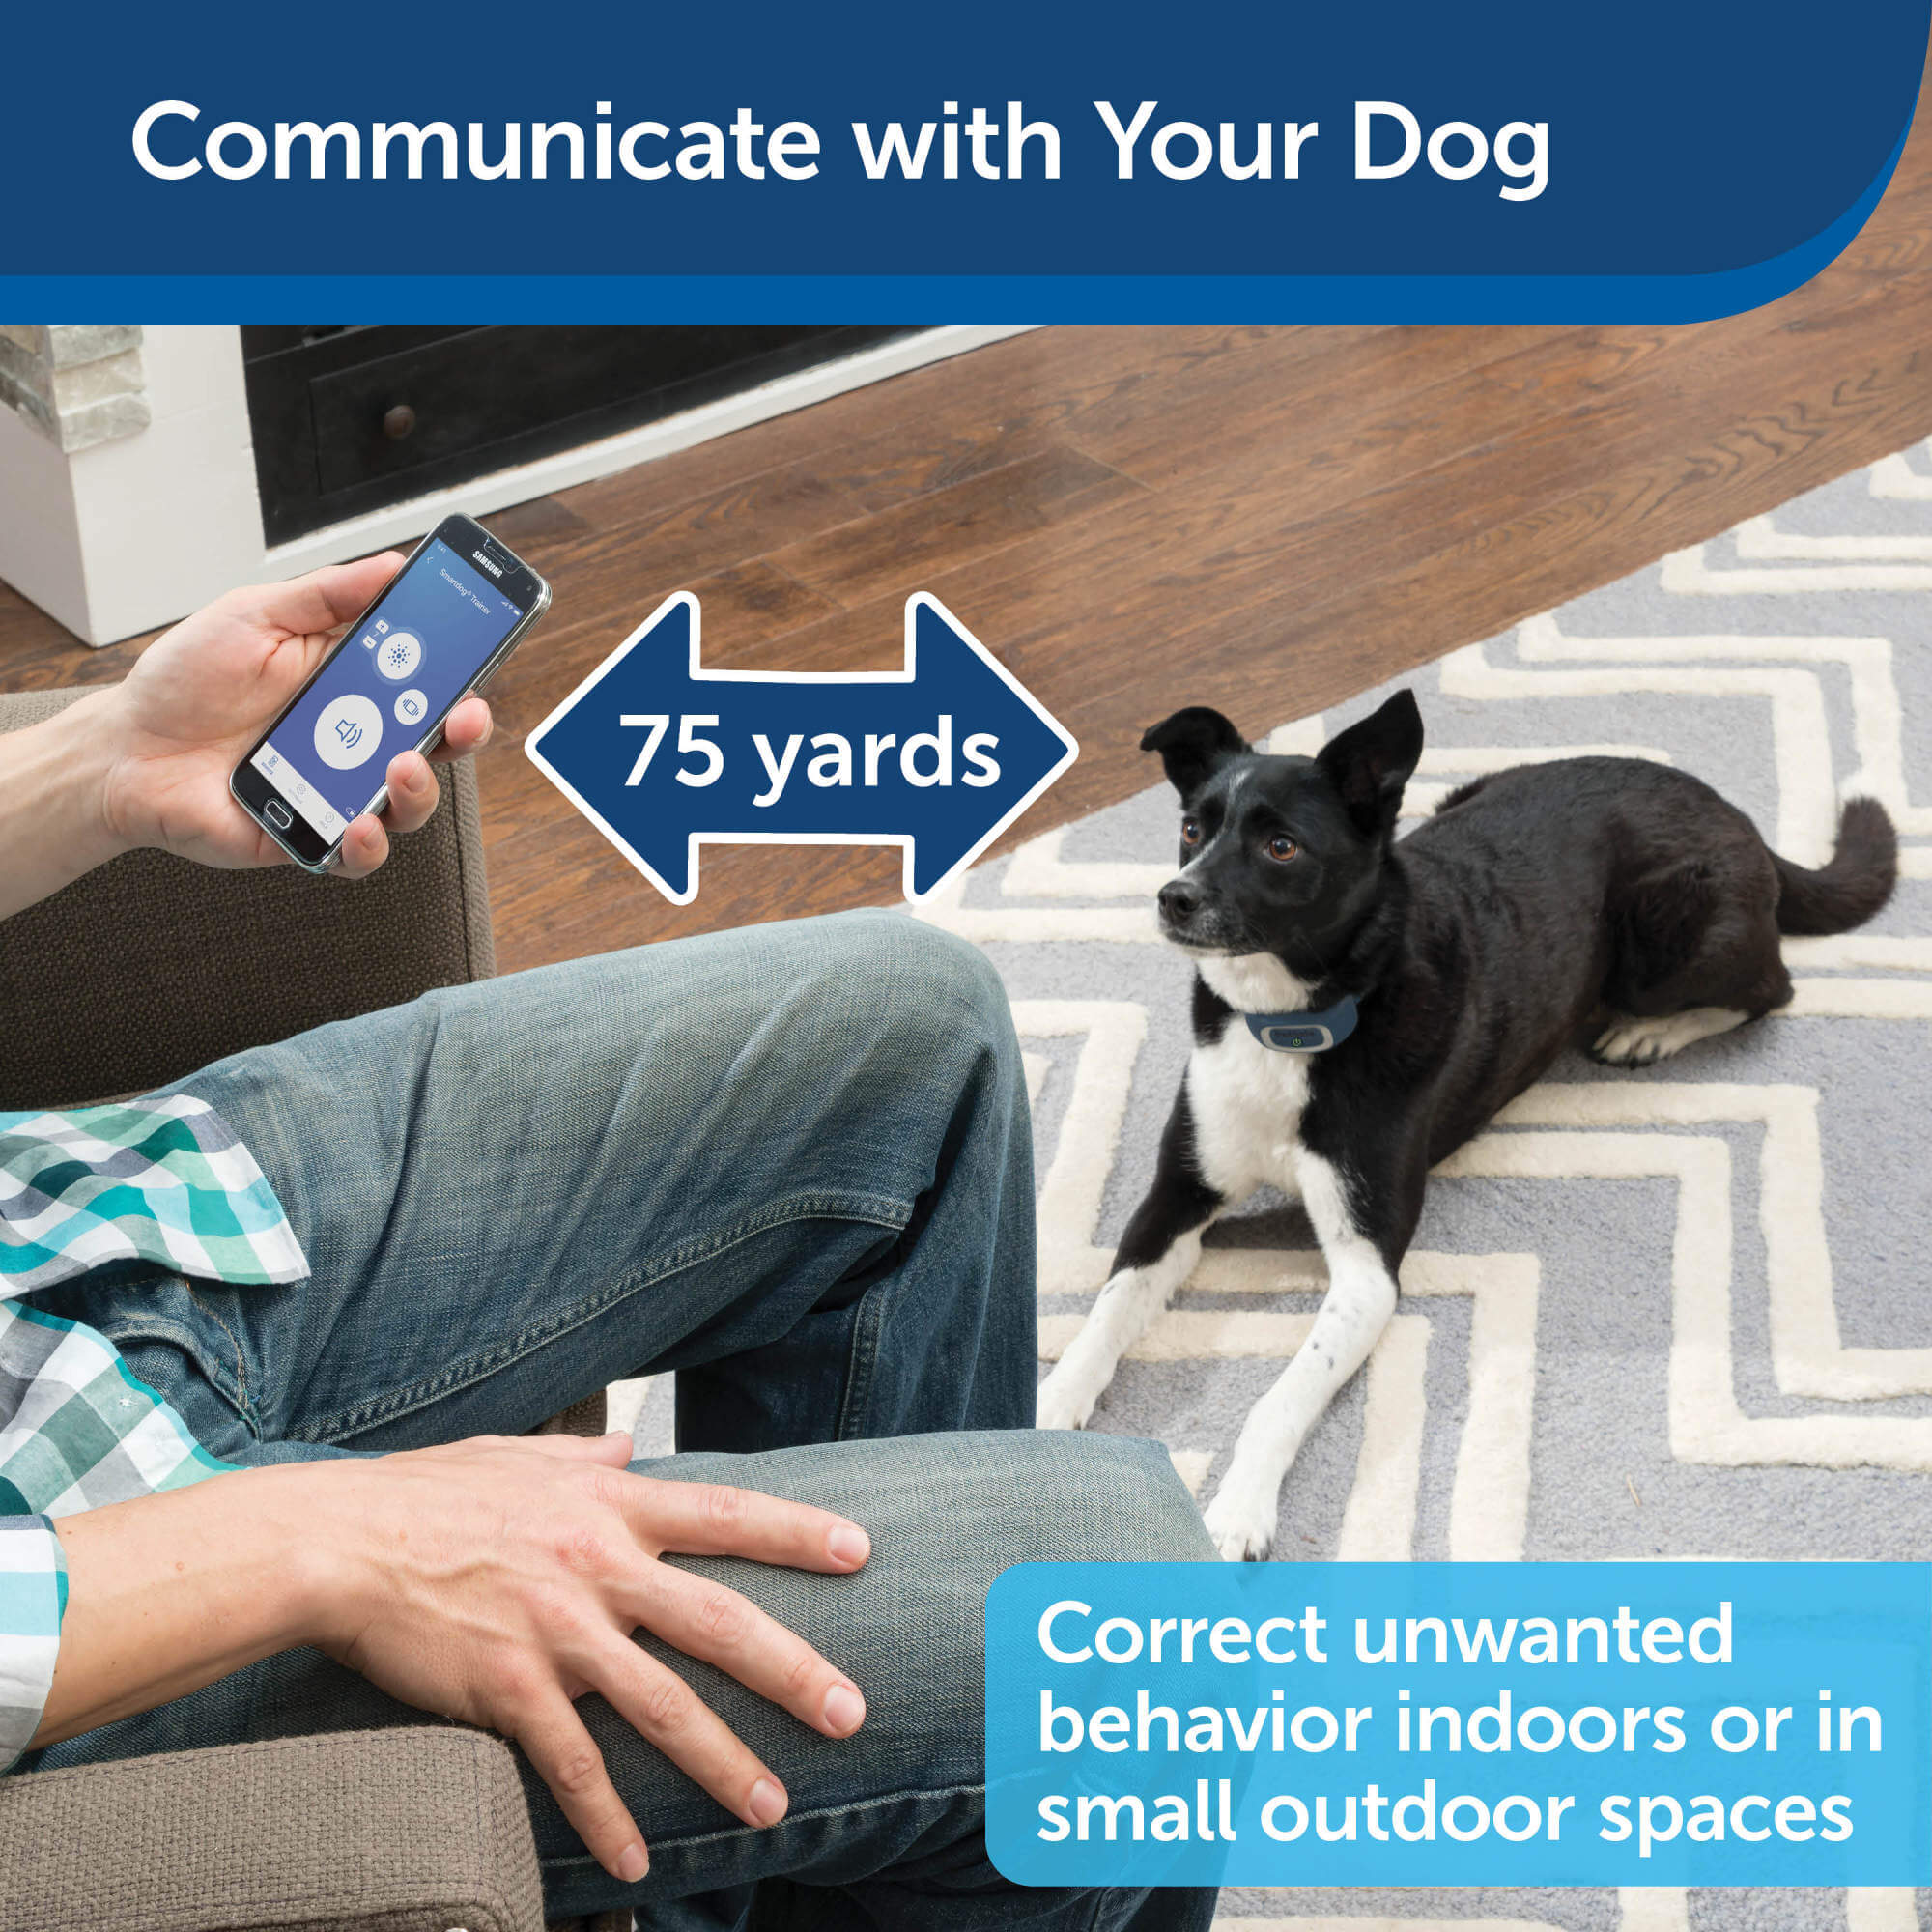 Communicate with your dog